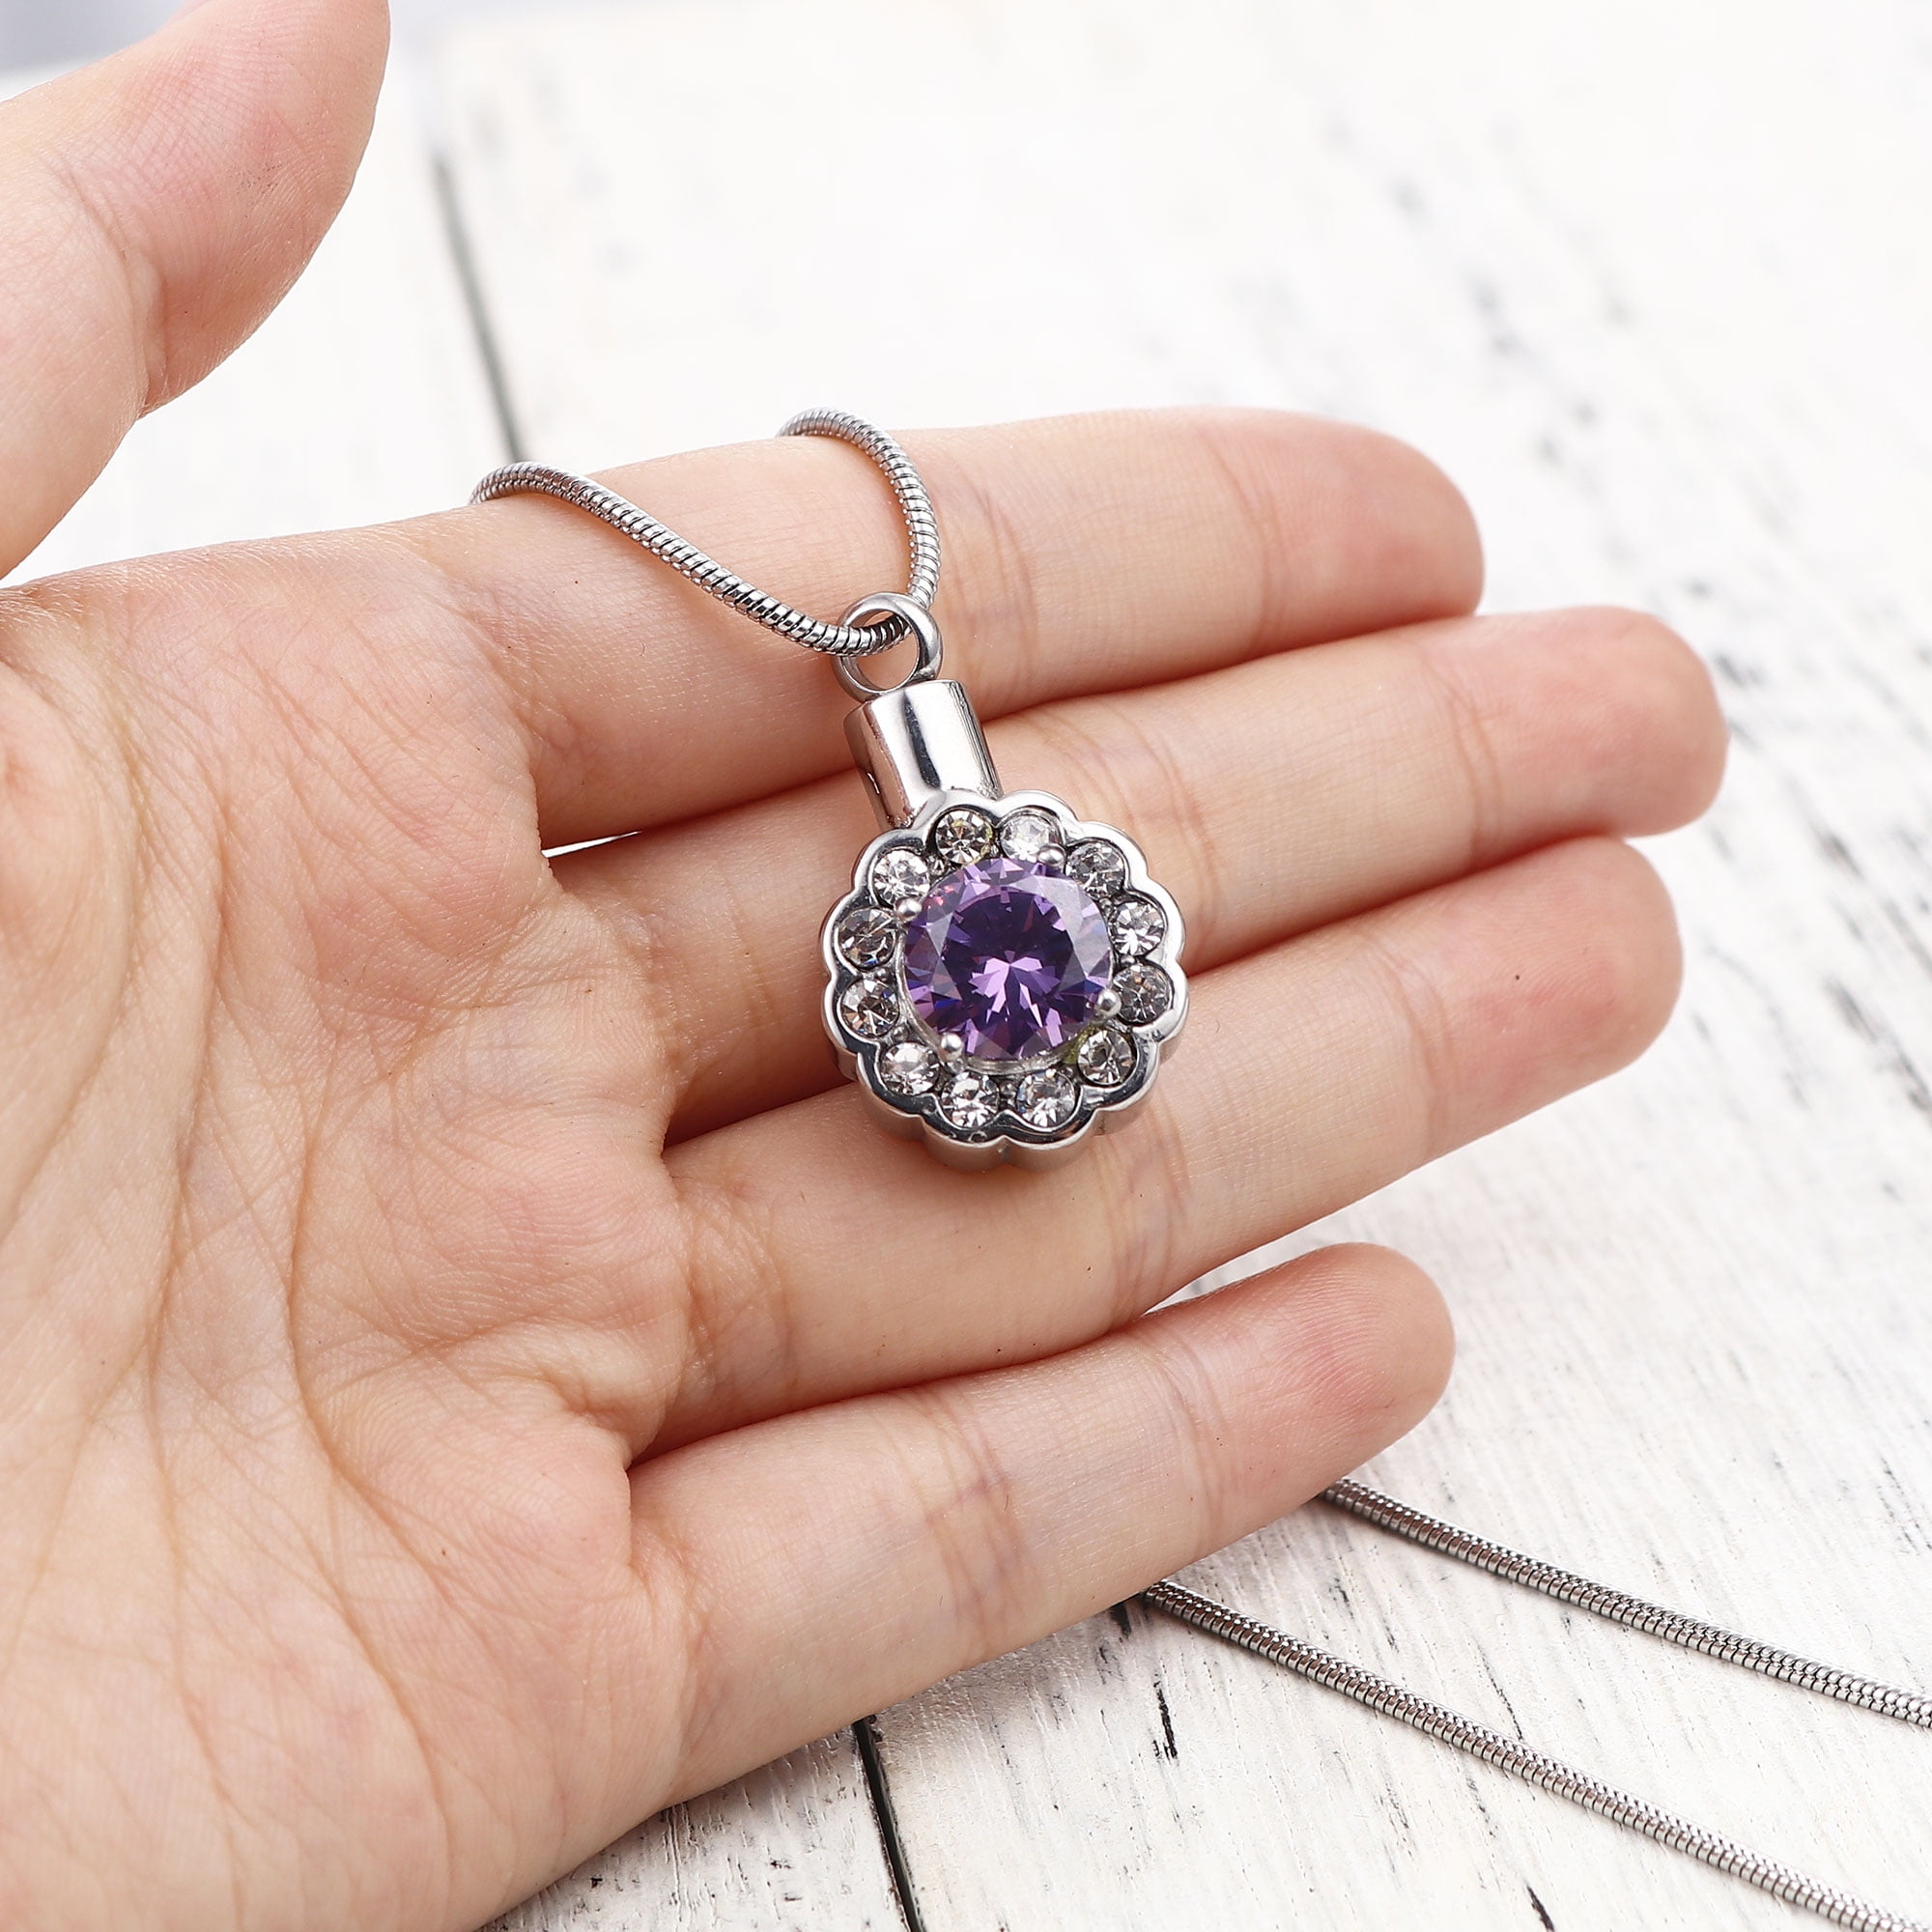 Amazon.com: Cremation Urn Jewelry Waterproof Diamond Hollow Flower Heart Urn  Pendant Memorial Remains Ashes Keepsake Necklace : Arts, Crafts & Sewing